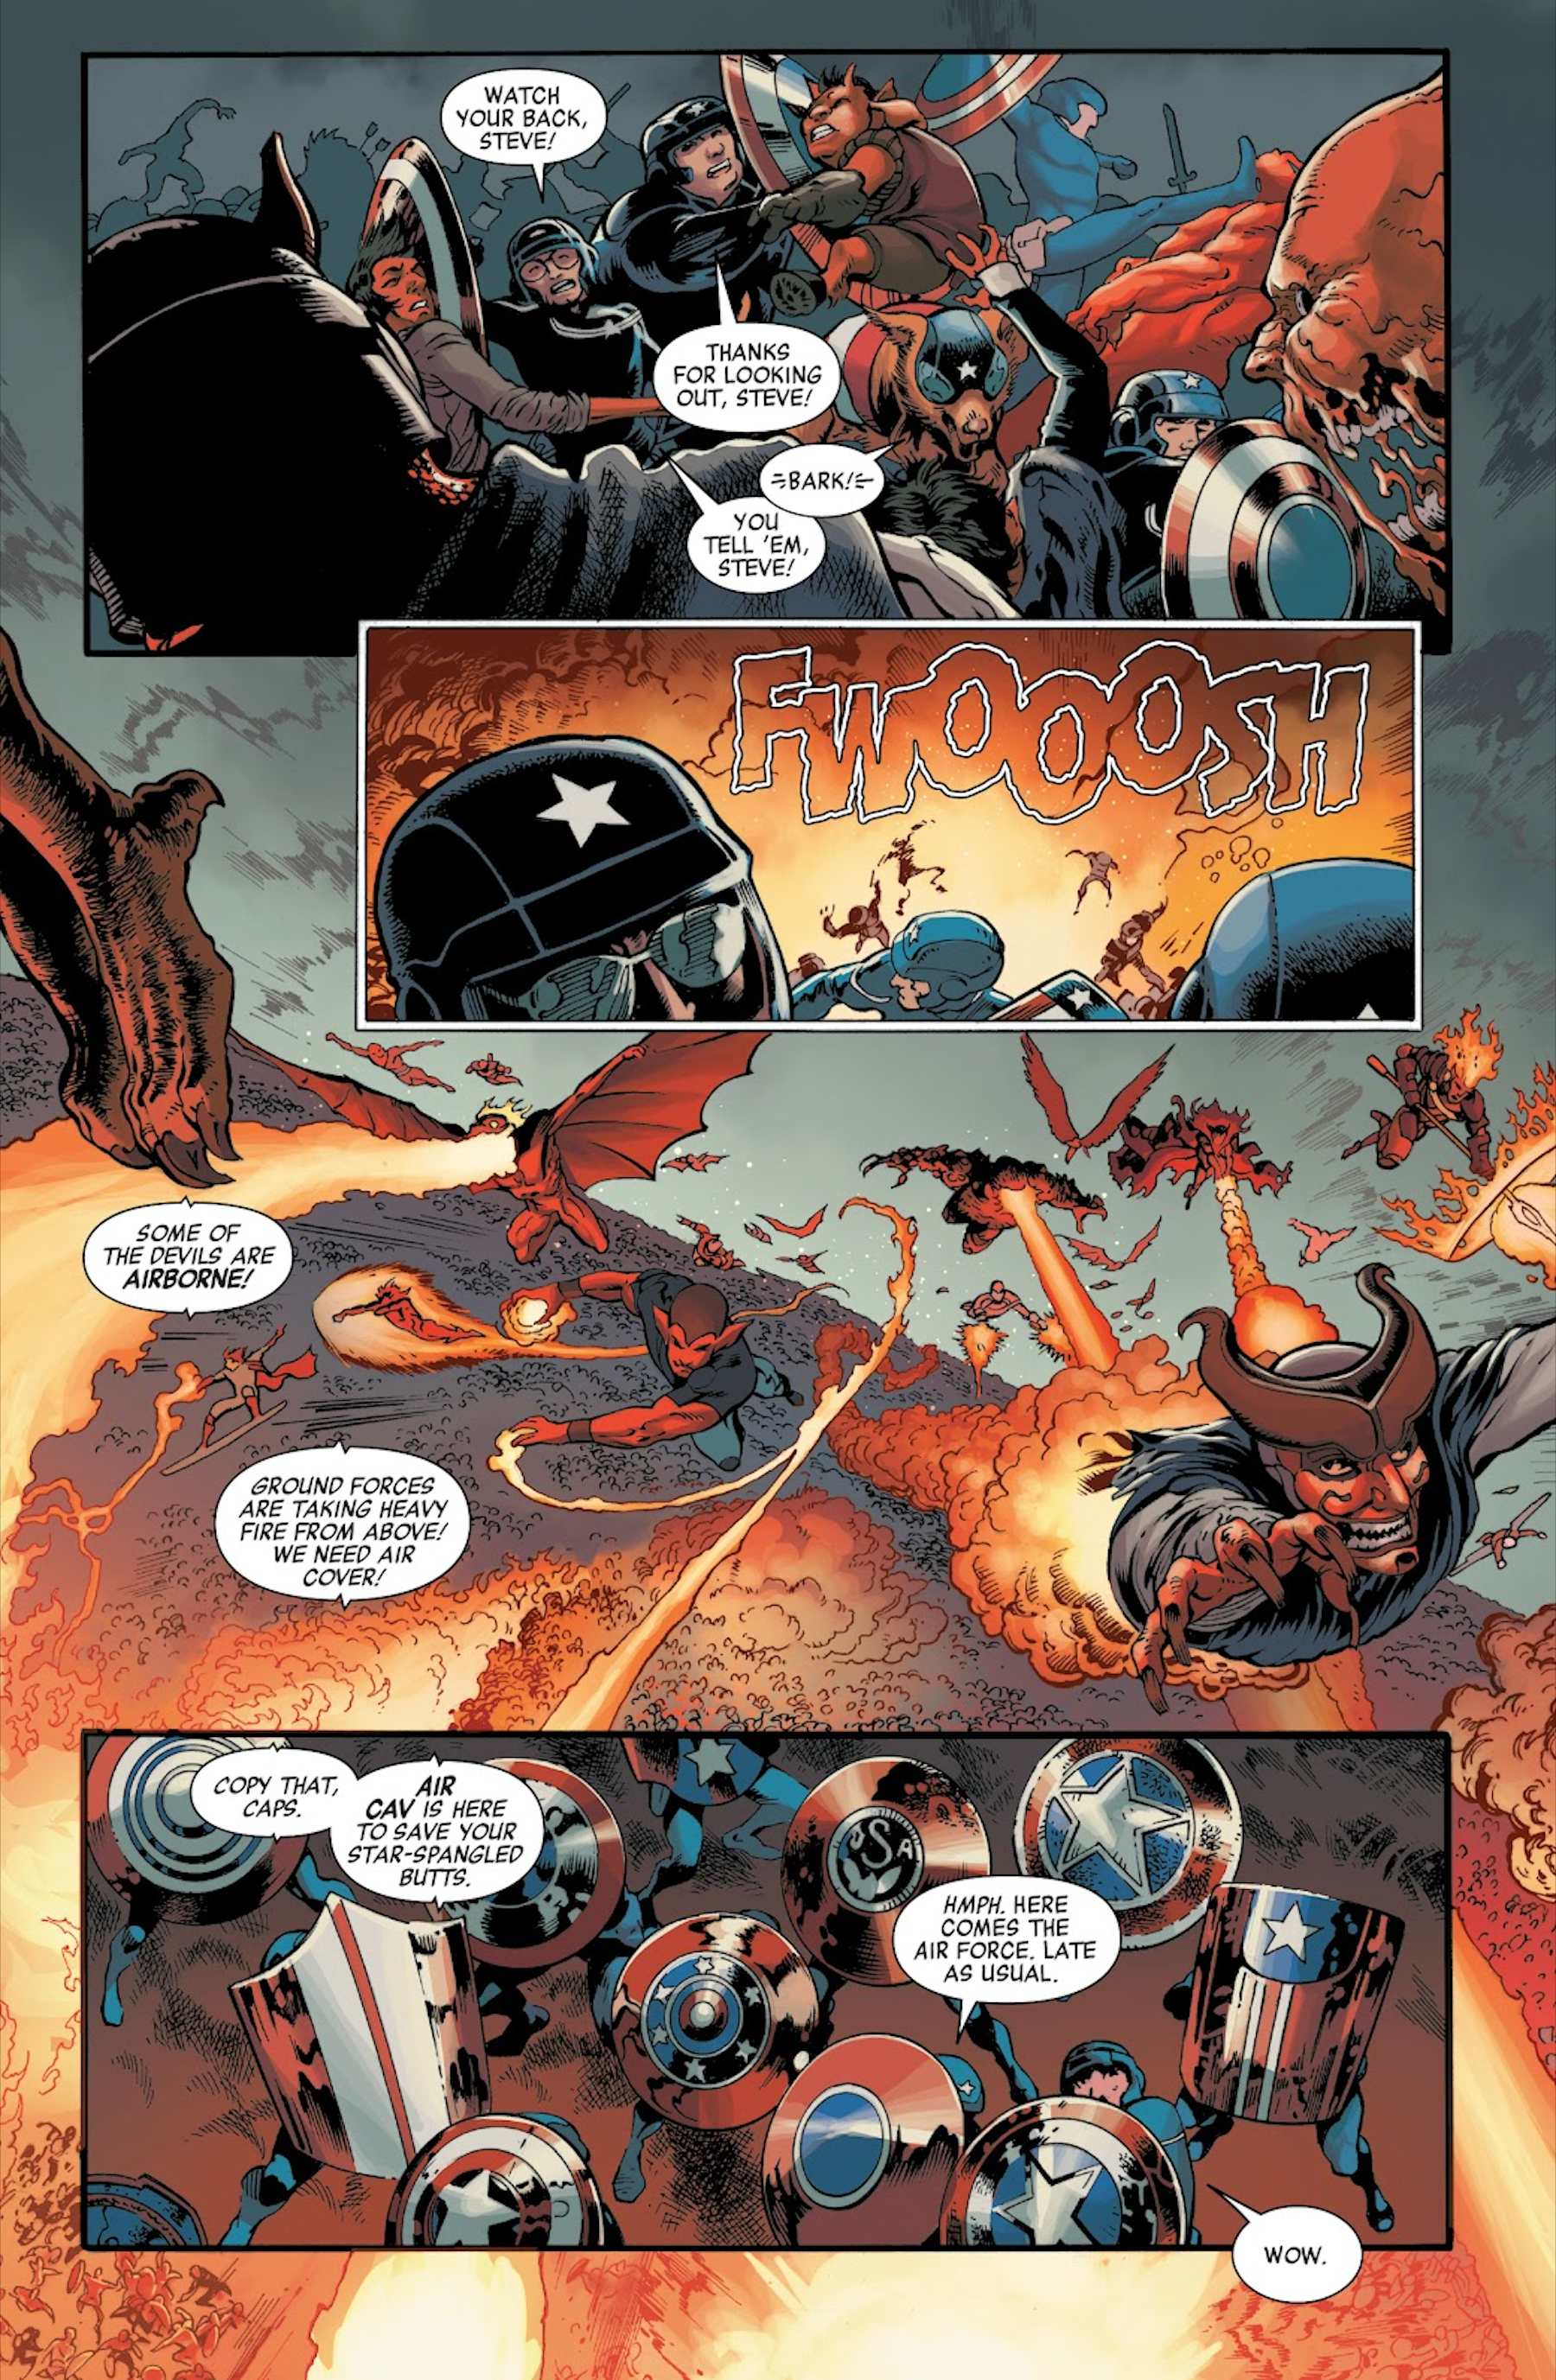 The Captain America Army fights Mephisto in Avengers Forever